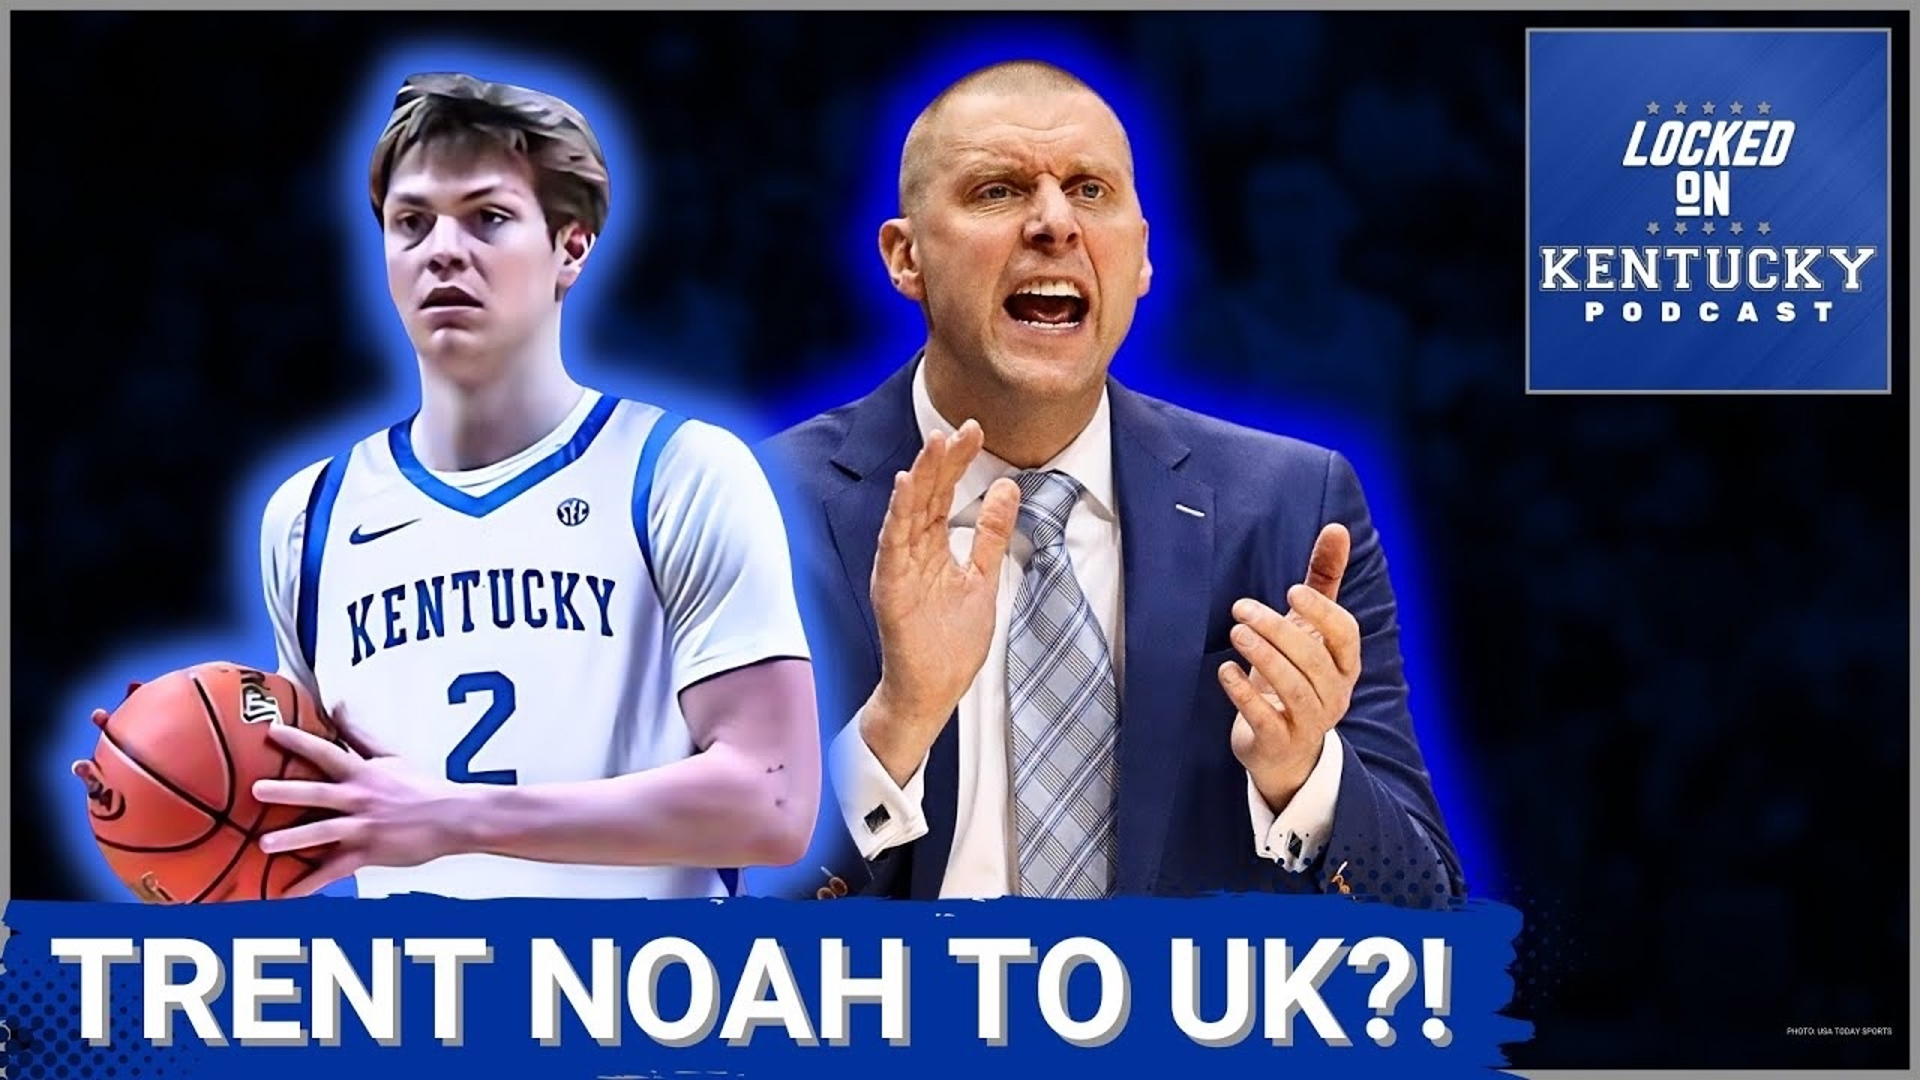 Kentucky basketball just landed a commitment from 4-star Trent Noah.